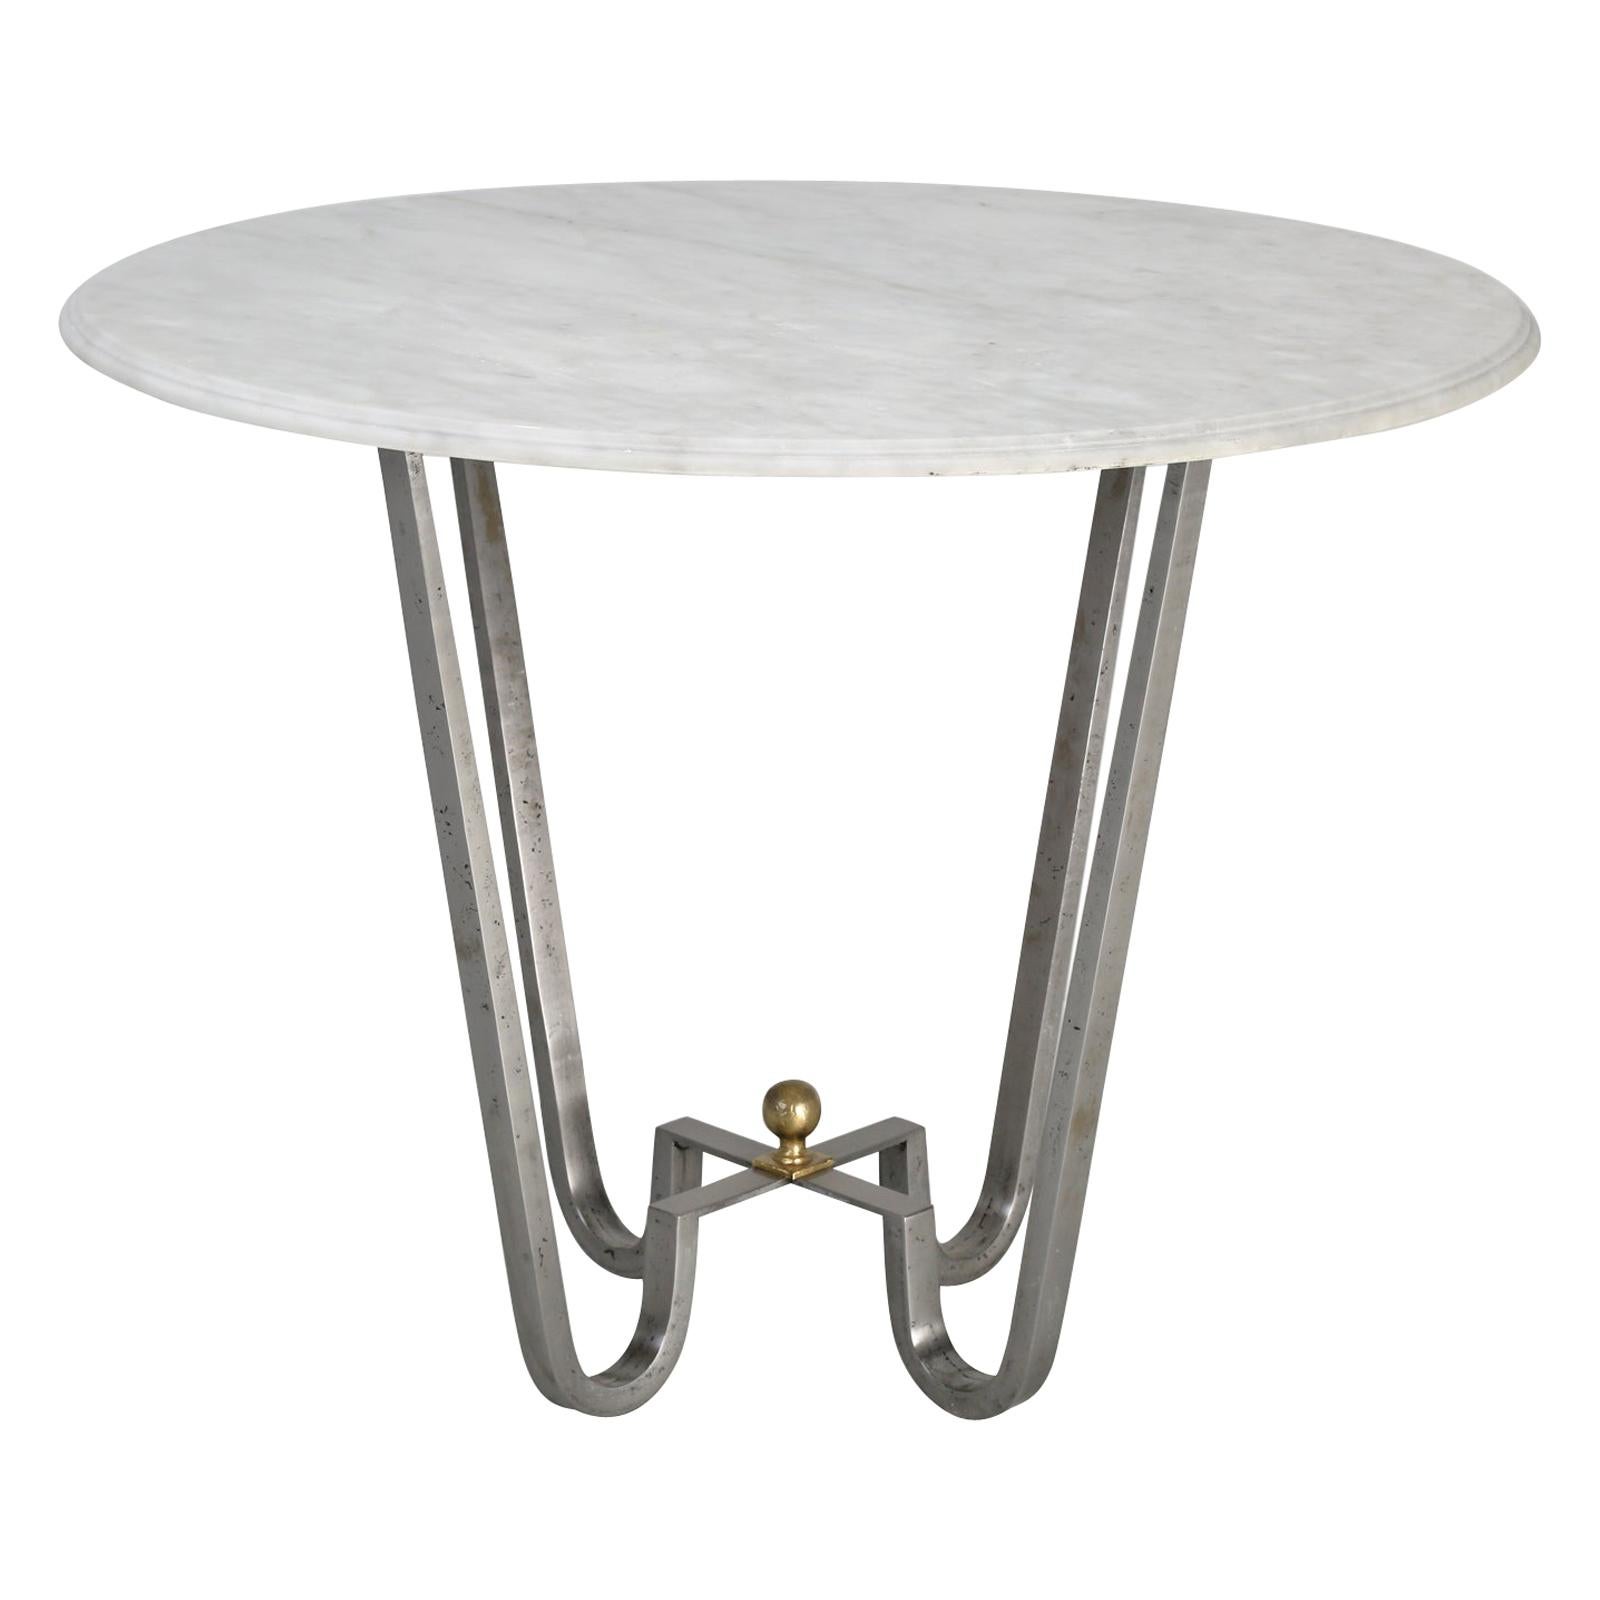 Burnished Steel Center Hall Table or End Table Made to Order For Sale